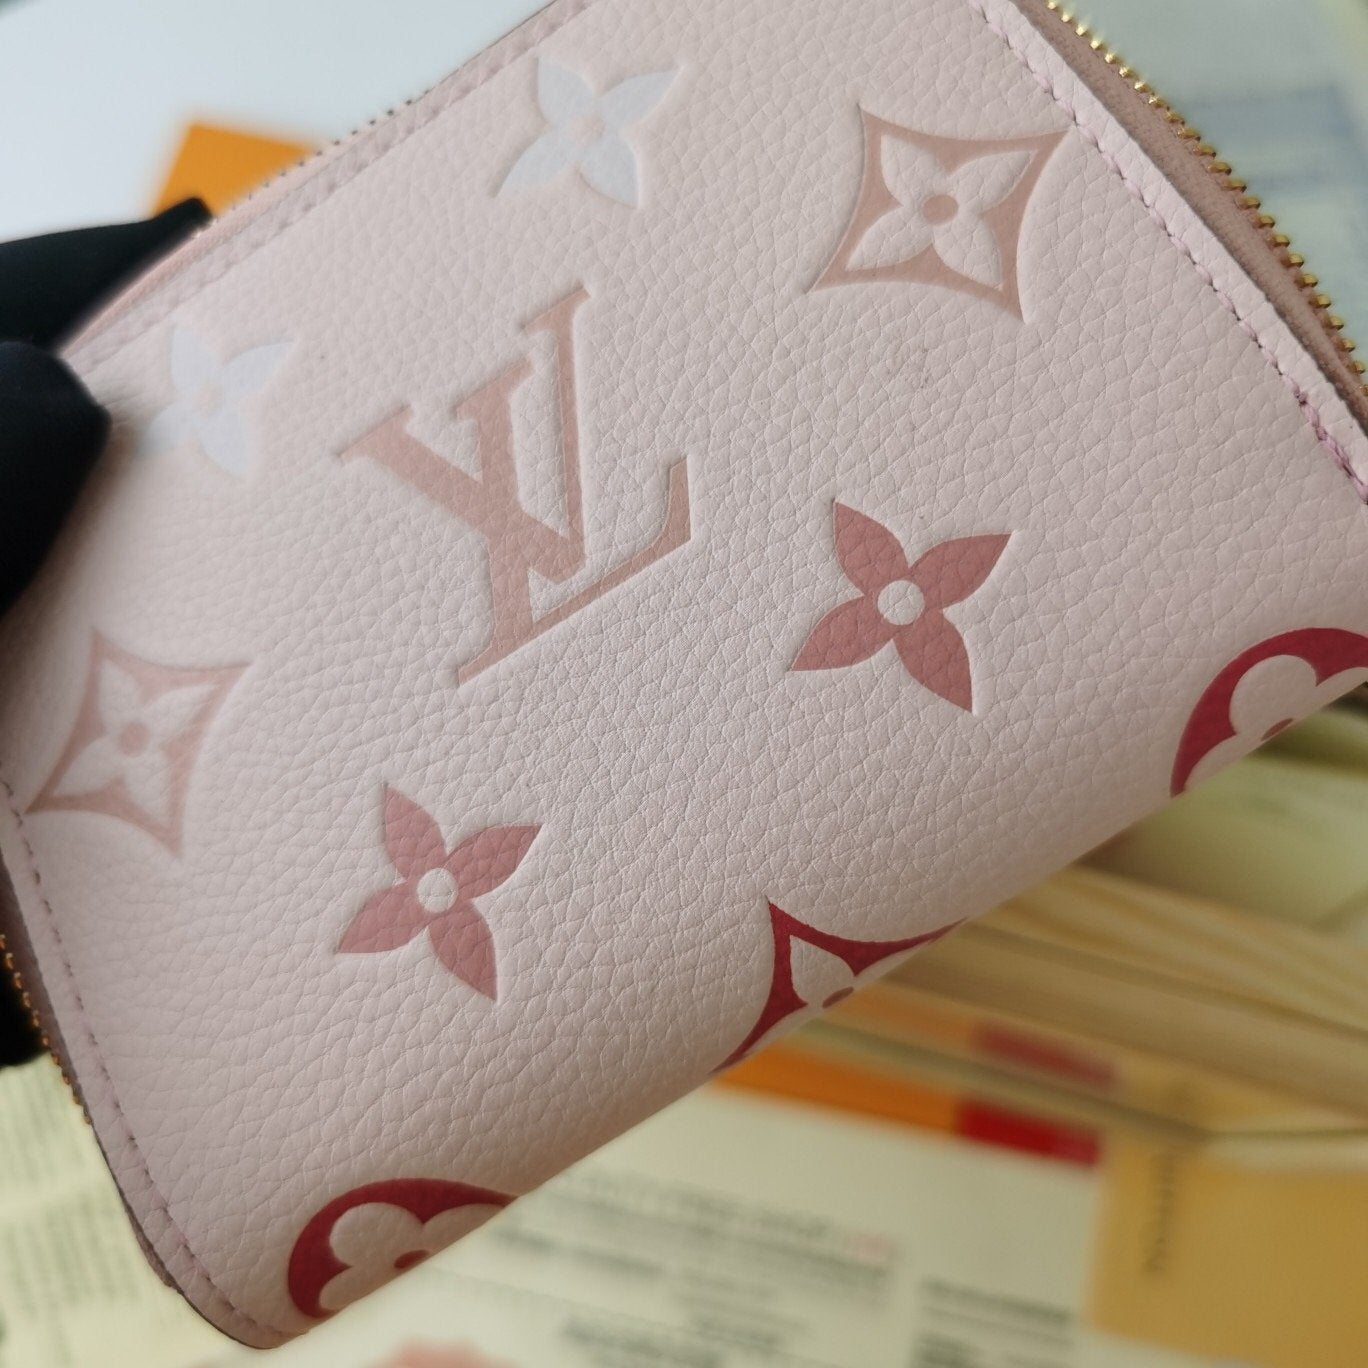 EI -New Wallets LUV 111